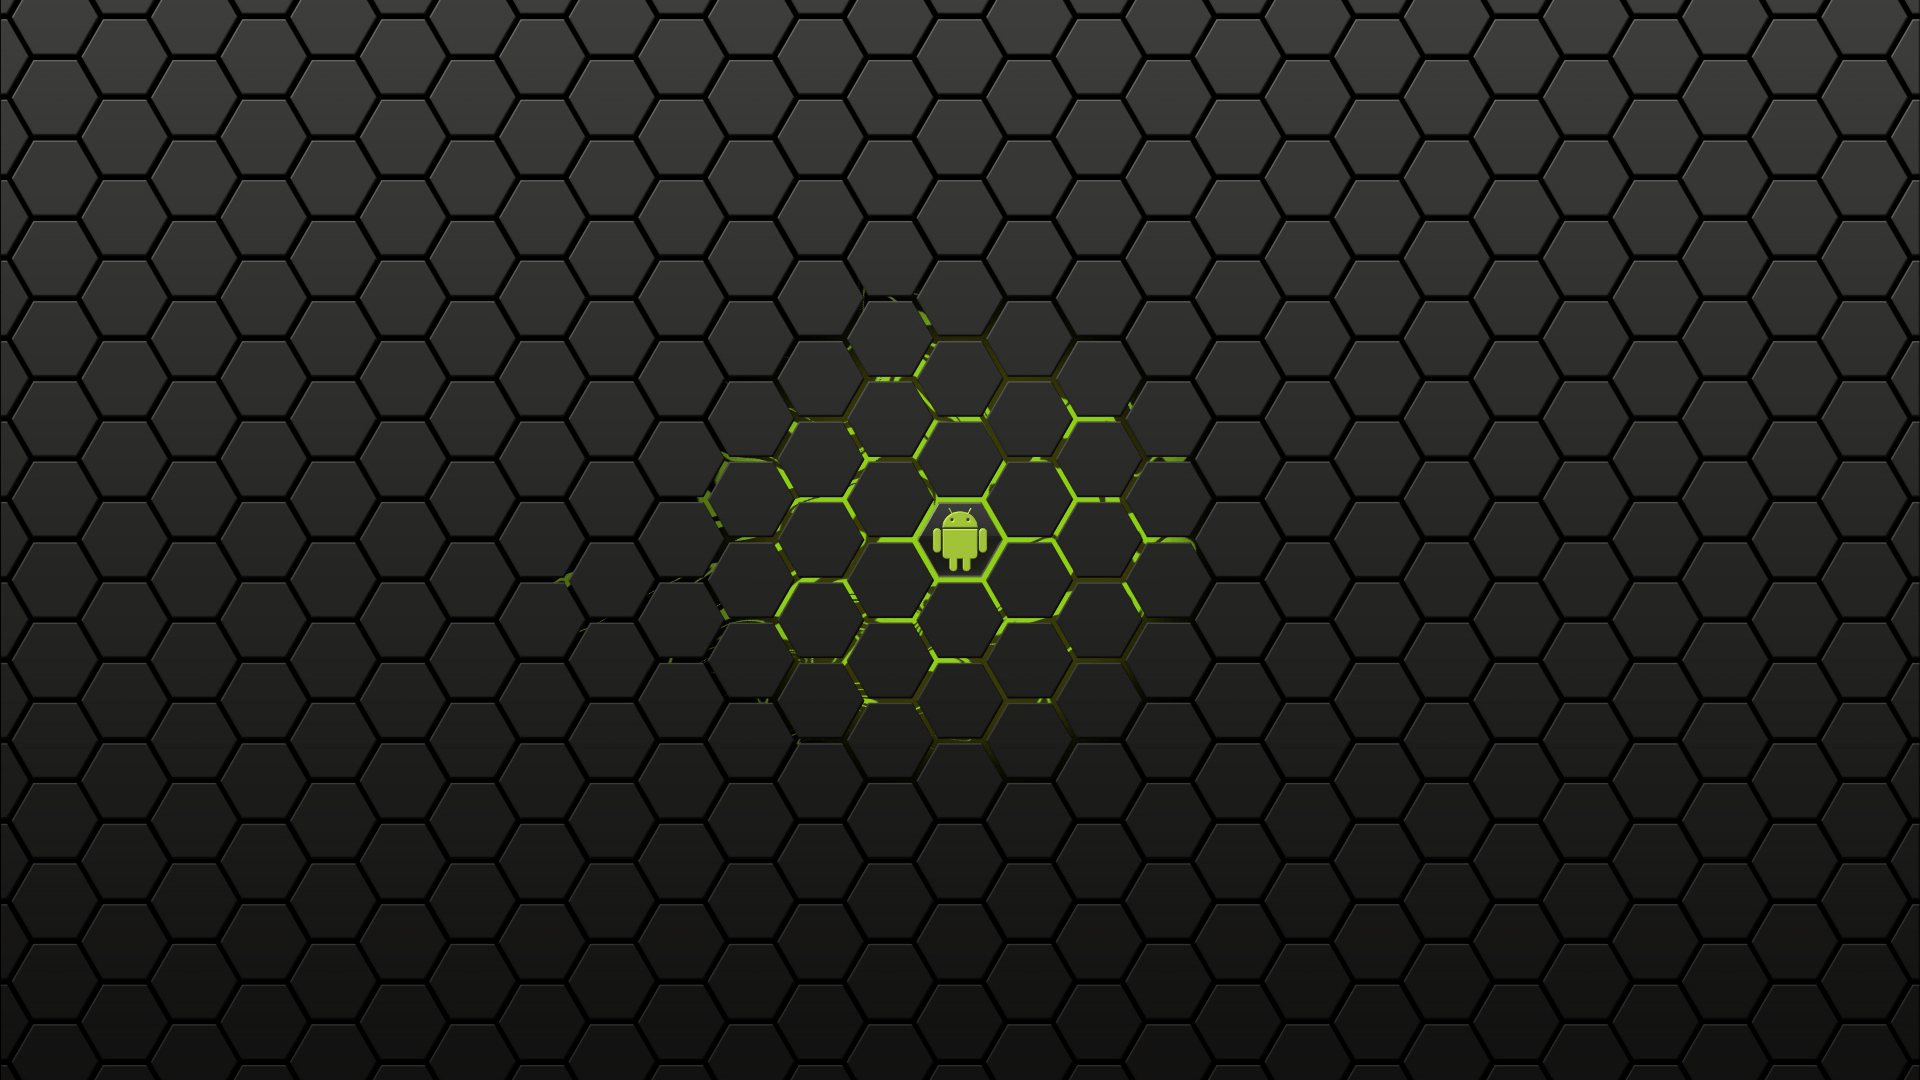 Android Logo Wallpapers Wallpaper Cave